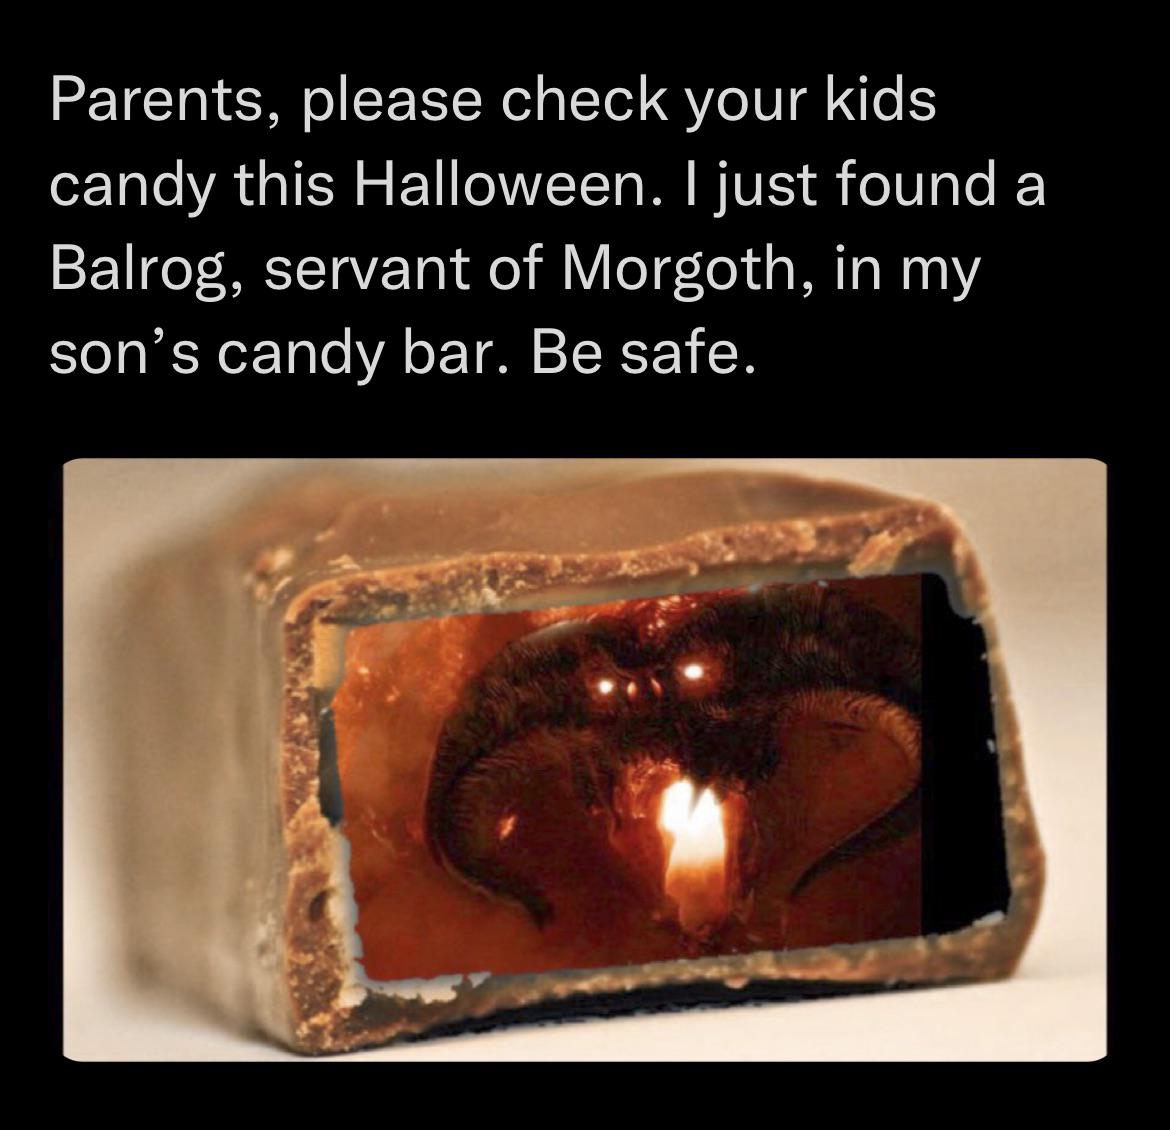 monday morning randomness - heat - Parents, please check your kids candy this Halloween. I just found a Balrog, servant of Morgoth, in my son's candy bar. Be safe.